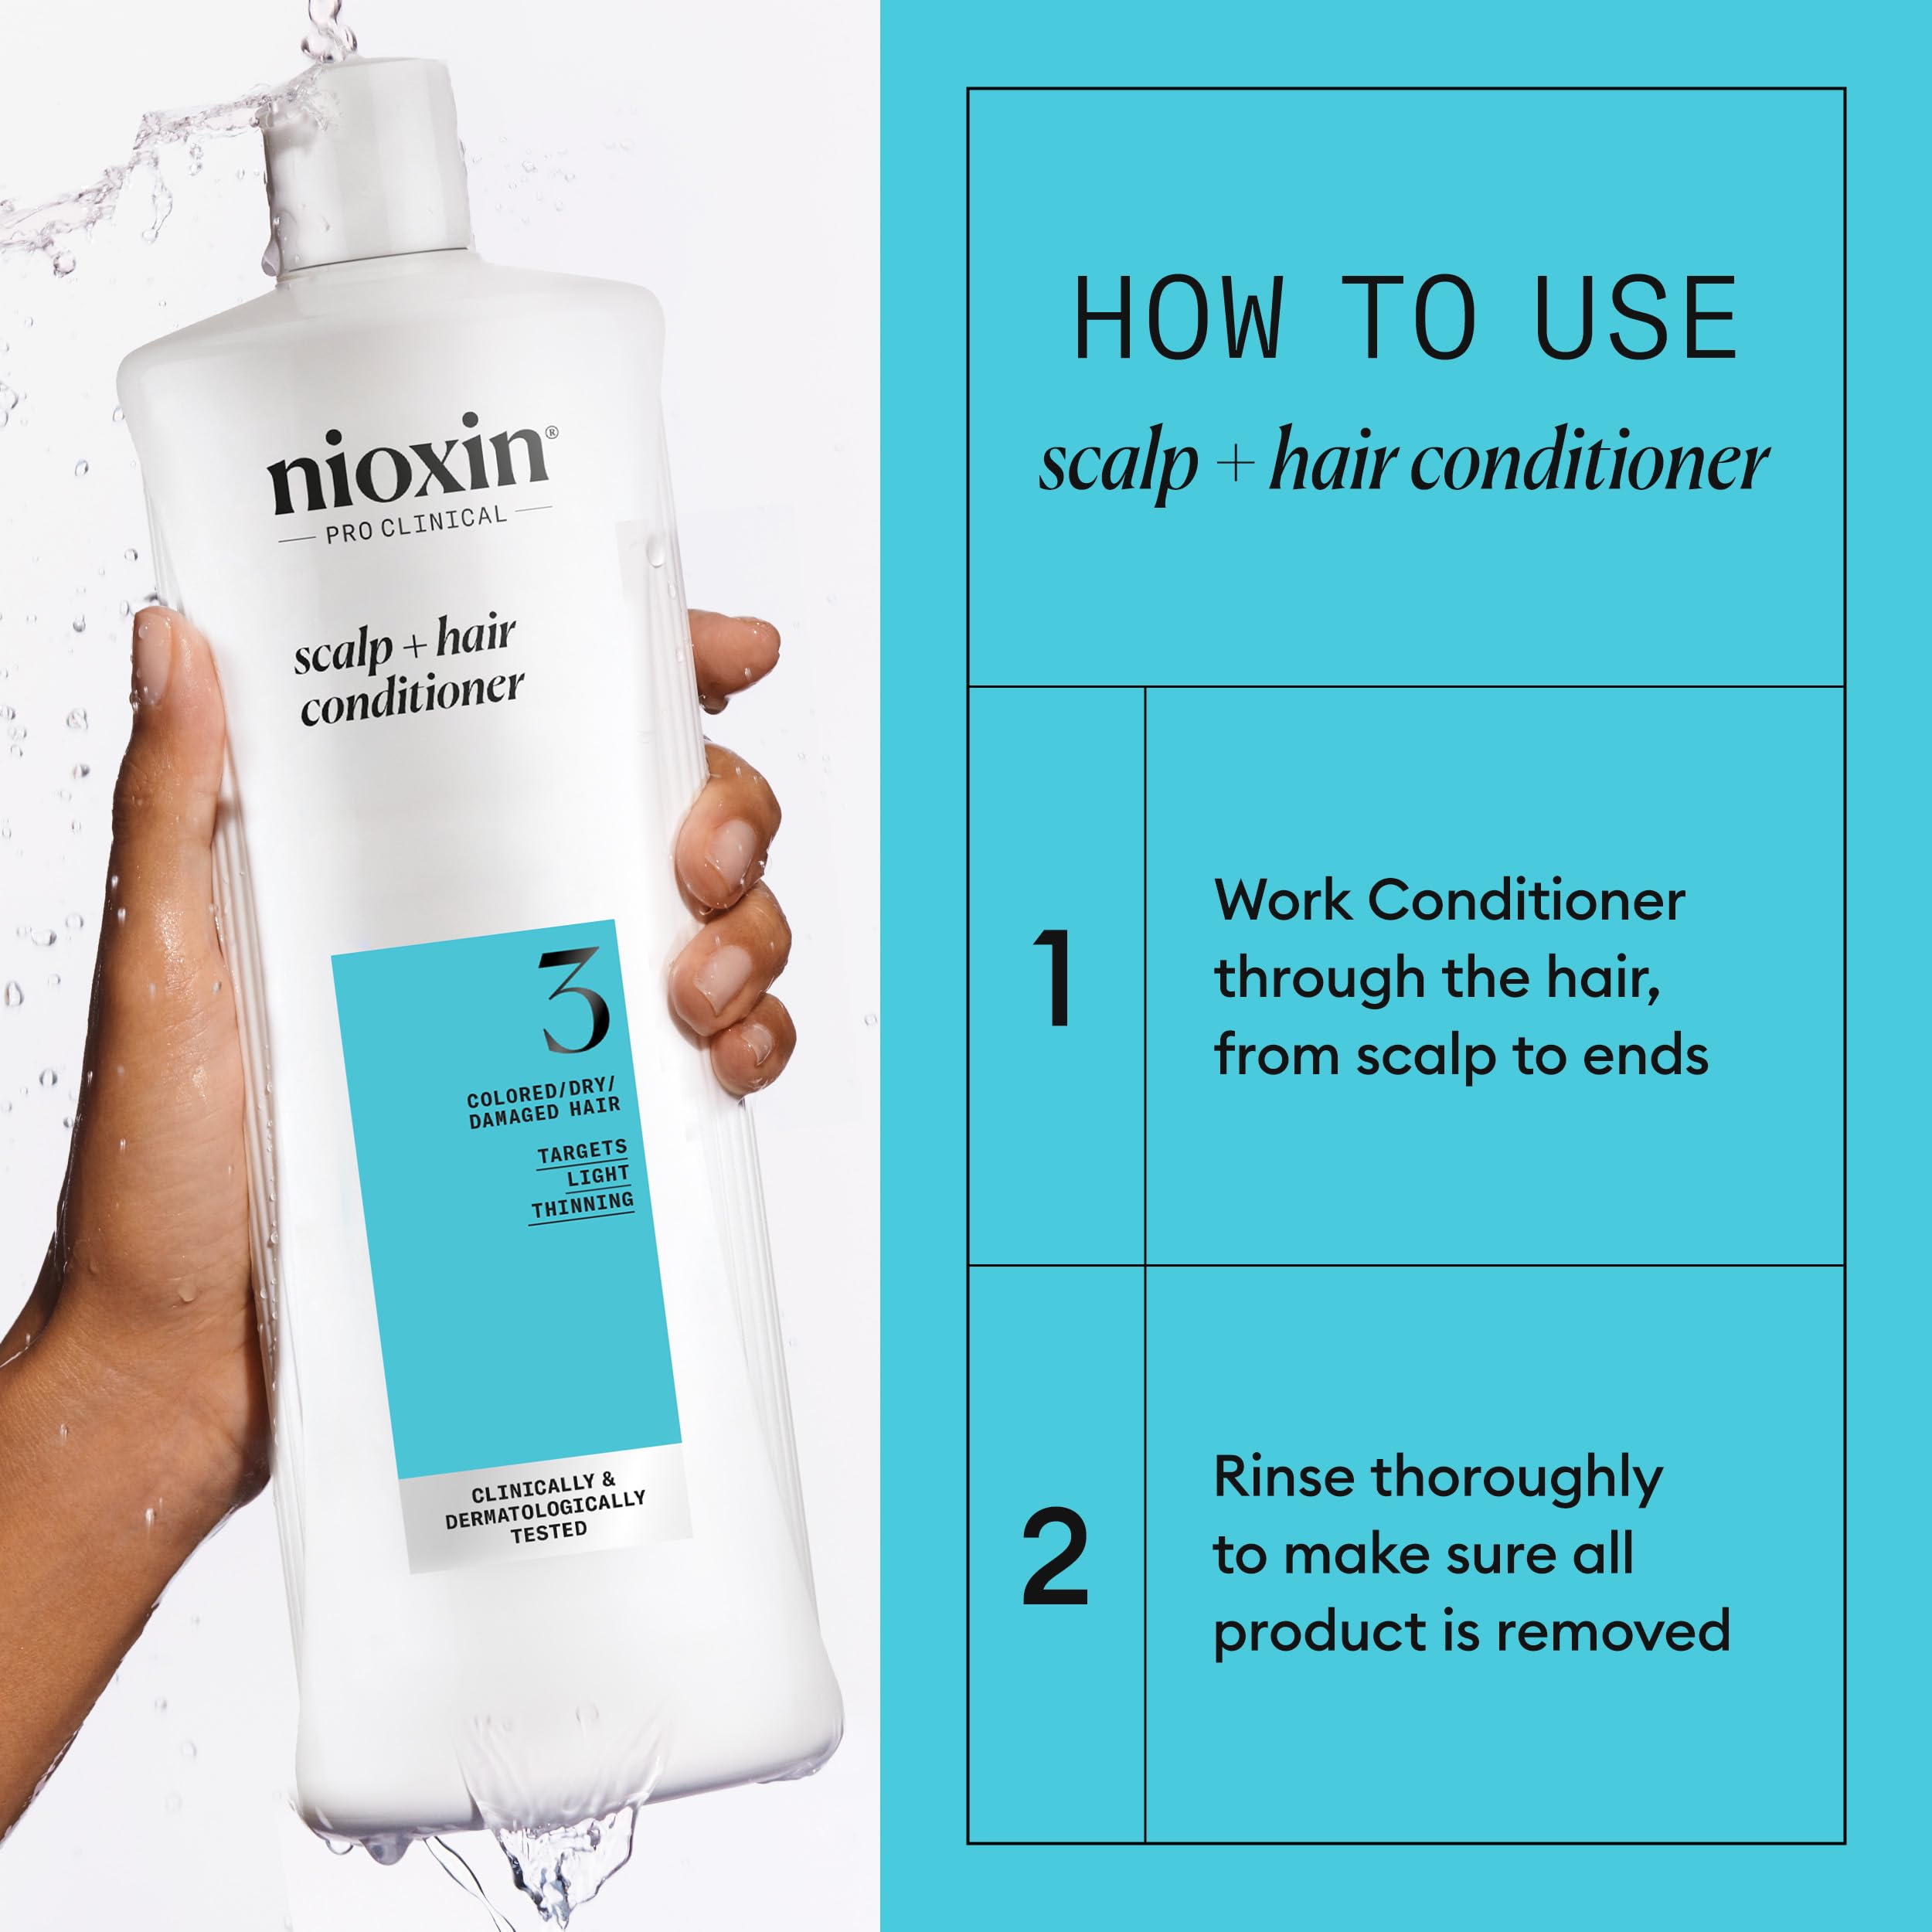 Nioxin System 3 Scalp + Hair Conditioner - Hair Thickening Conditioner for Damaged Hair with Light Thinning, 33.8oz